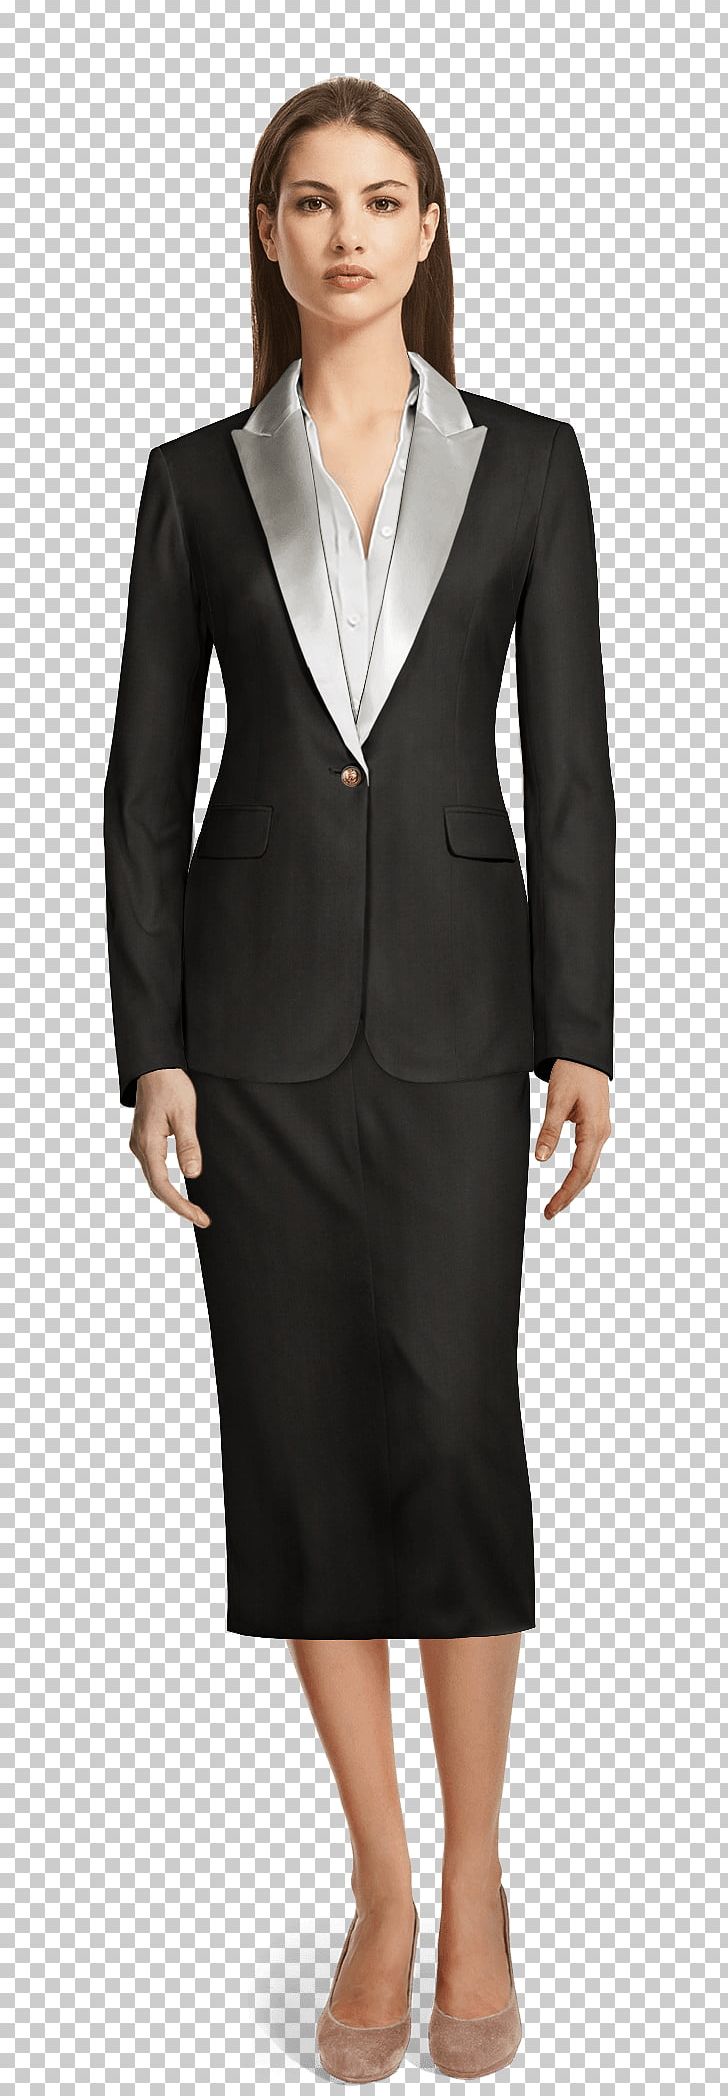 Tuxedo Lapel Suit Double-breasted Single-breasted PNG, Clipart, Black, Blazer, Business, Businessperson, Button Free PNG Download